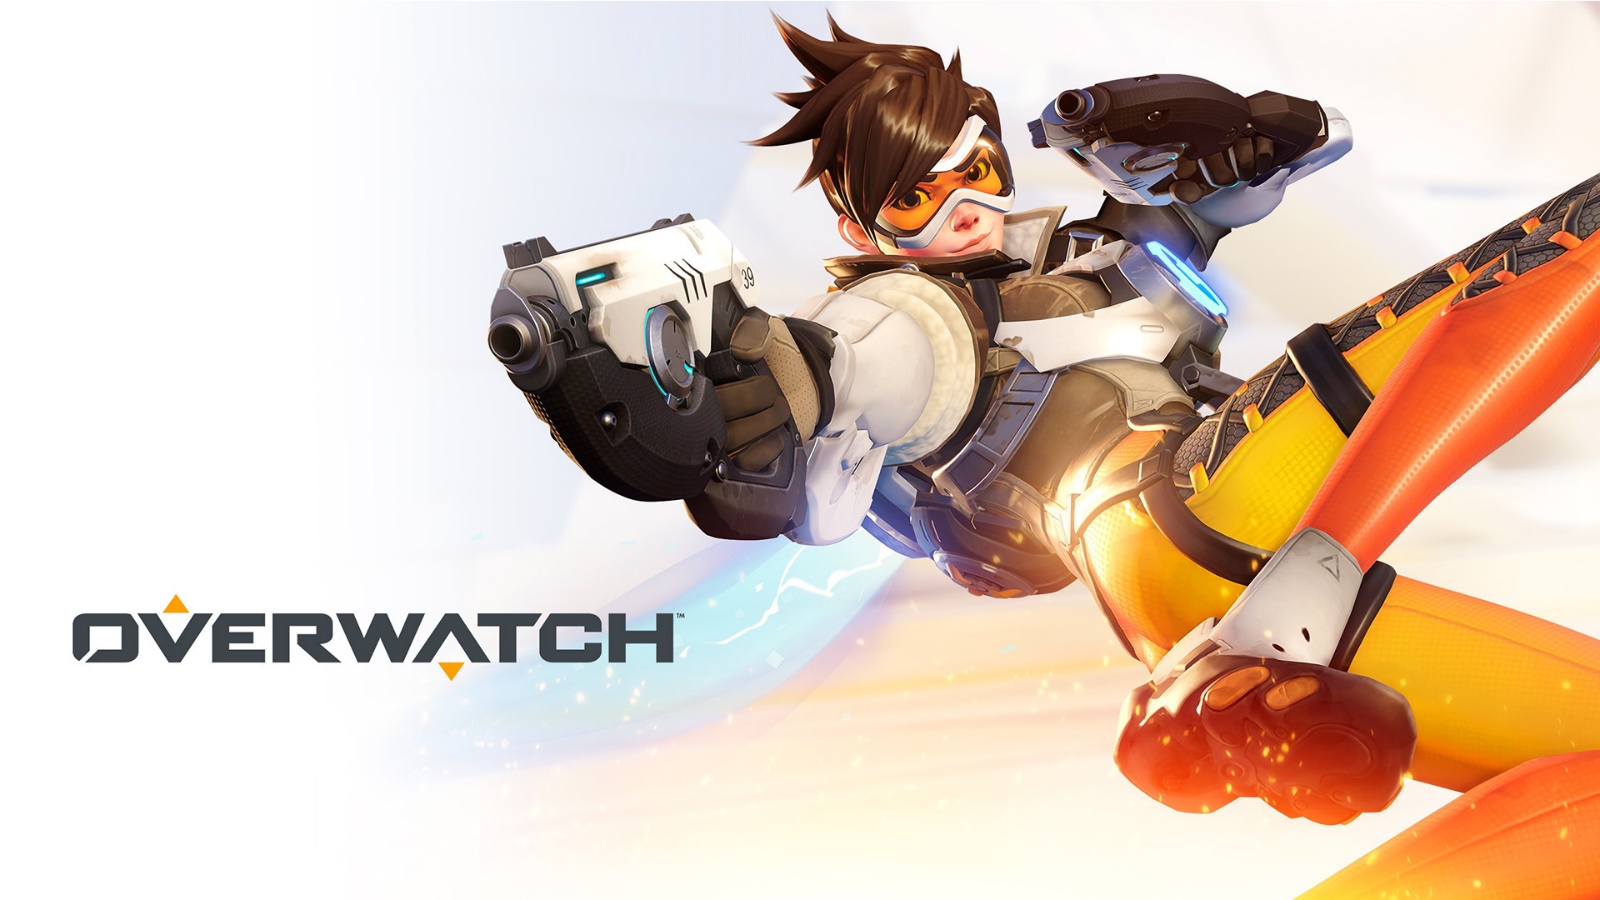 Tracer character of Overwatch game